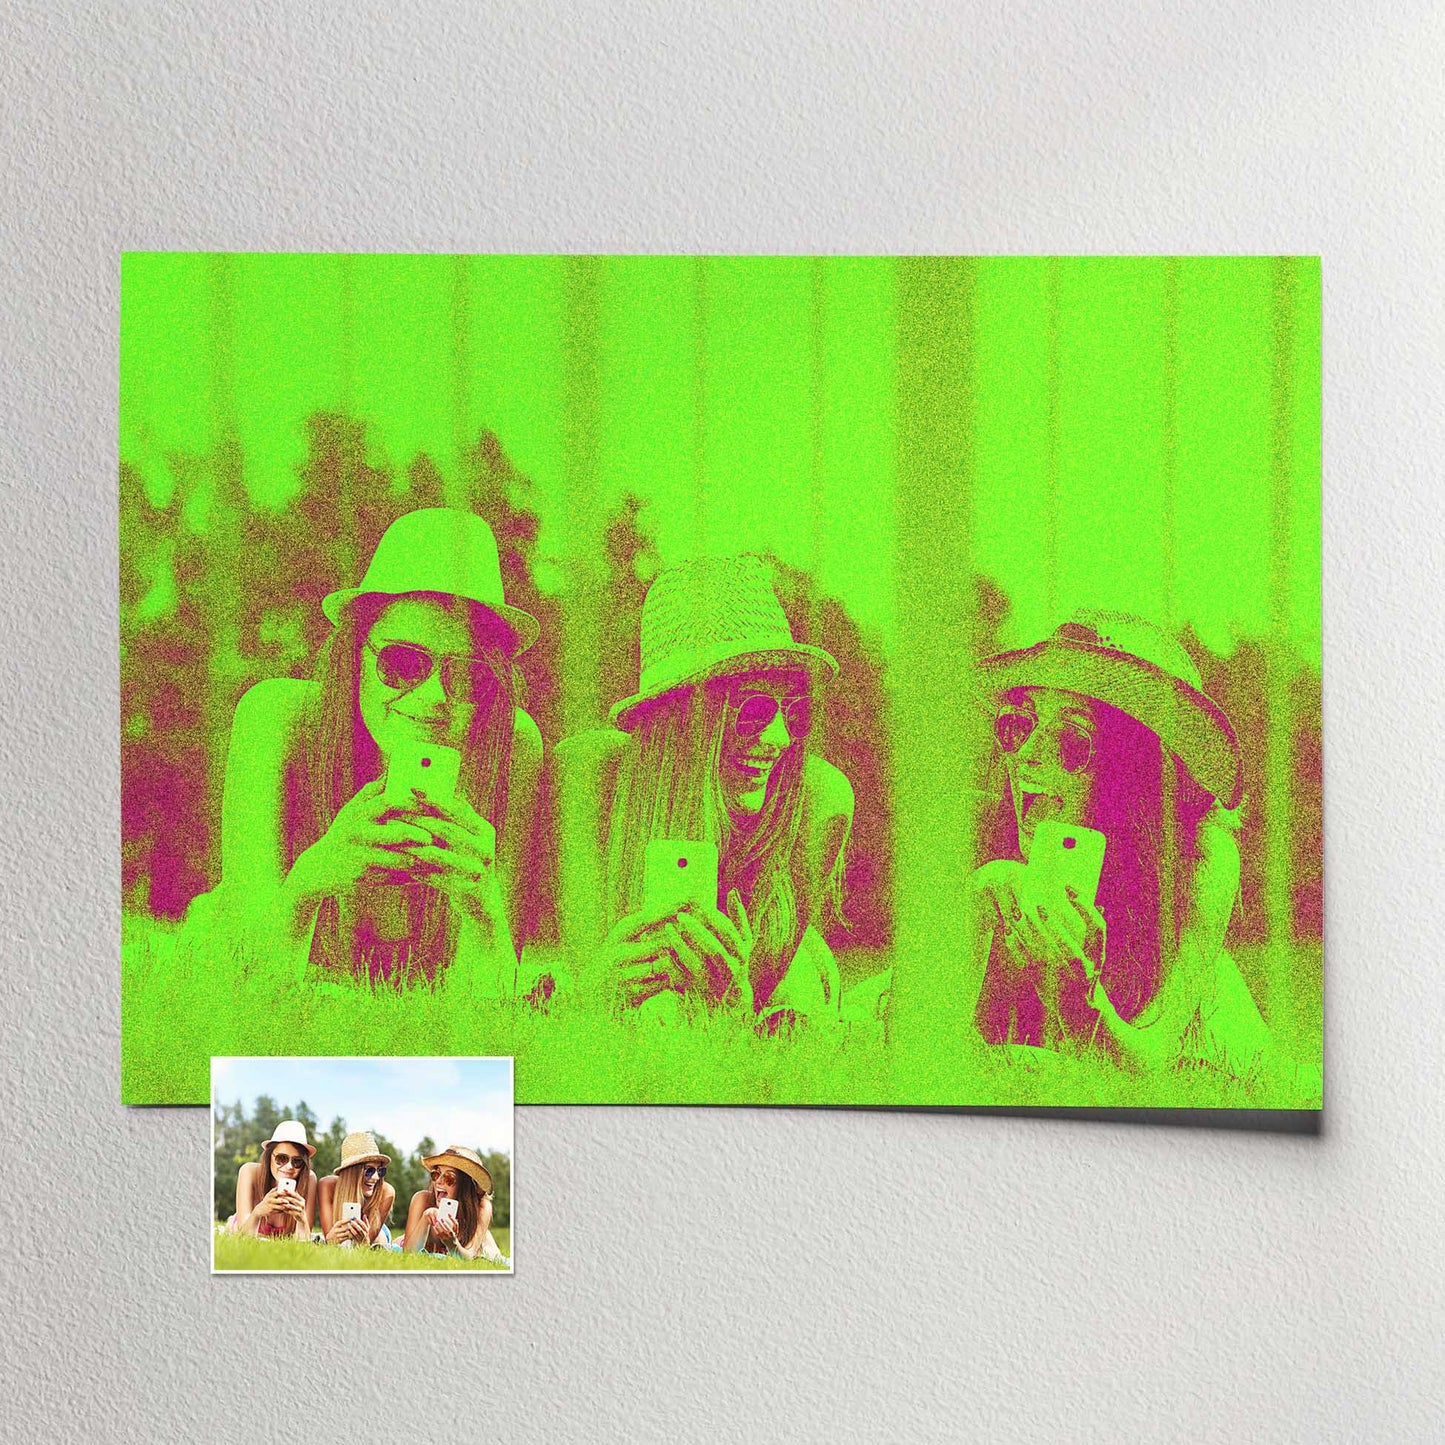 Add a pop of color and creativity to your surroundings with a Personalised Neon Green Print. The unique bad print filter effect enhances the neon green and pink hues, creating a cool and edgy aesthetic, fresh and original wall art 